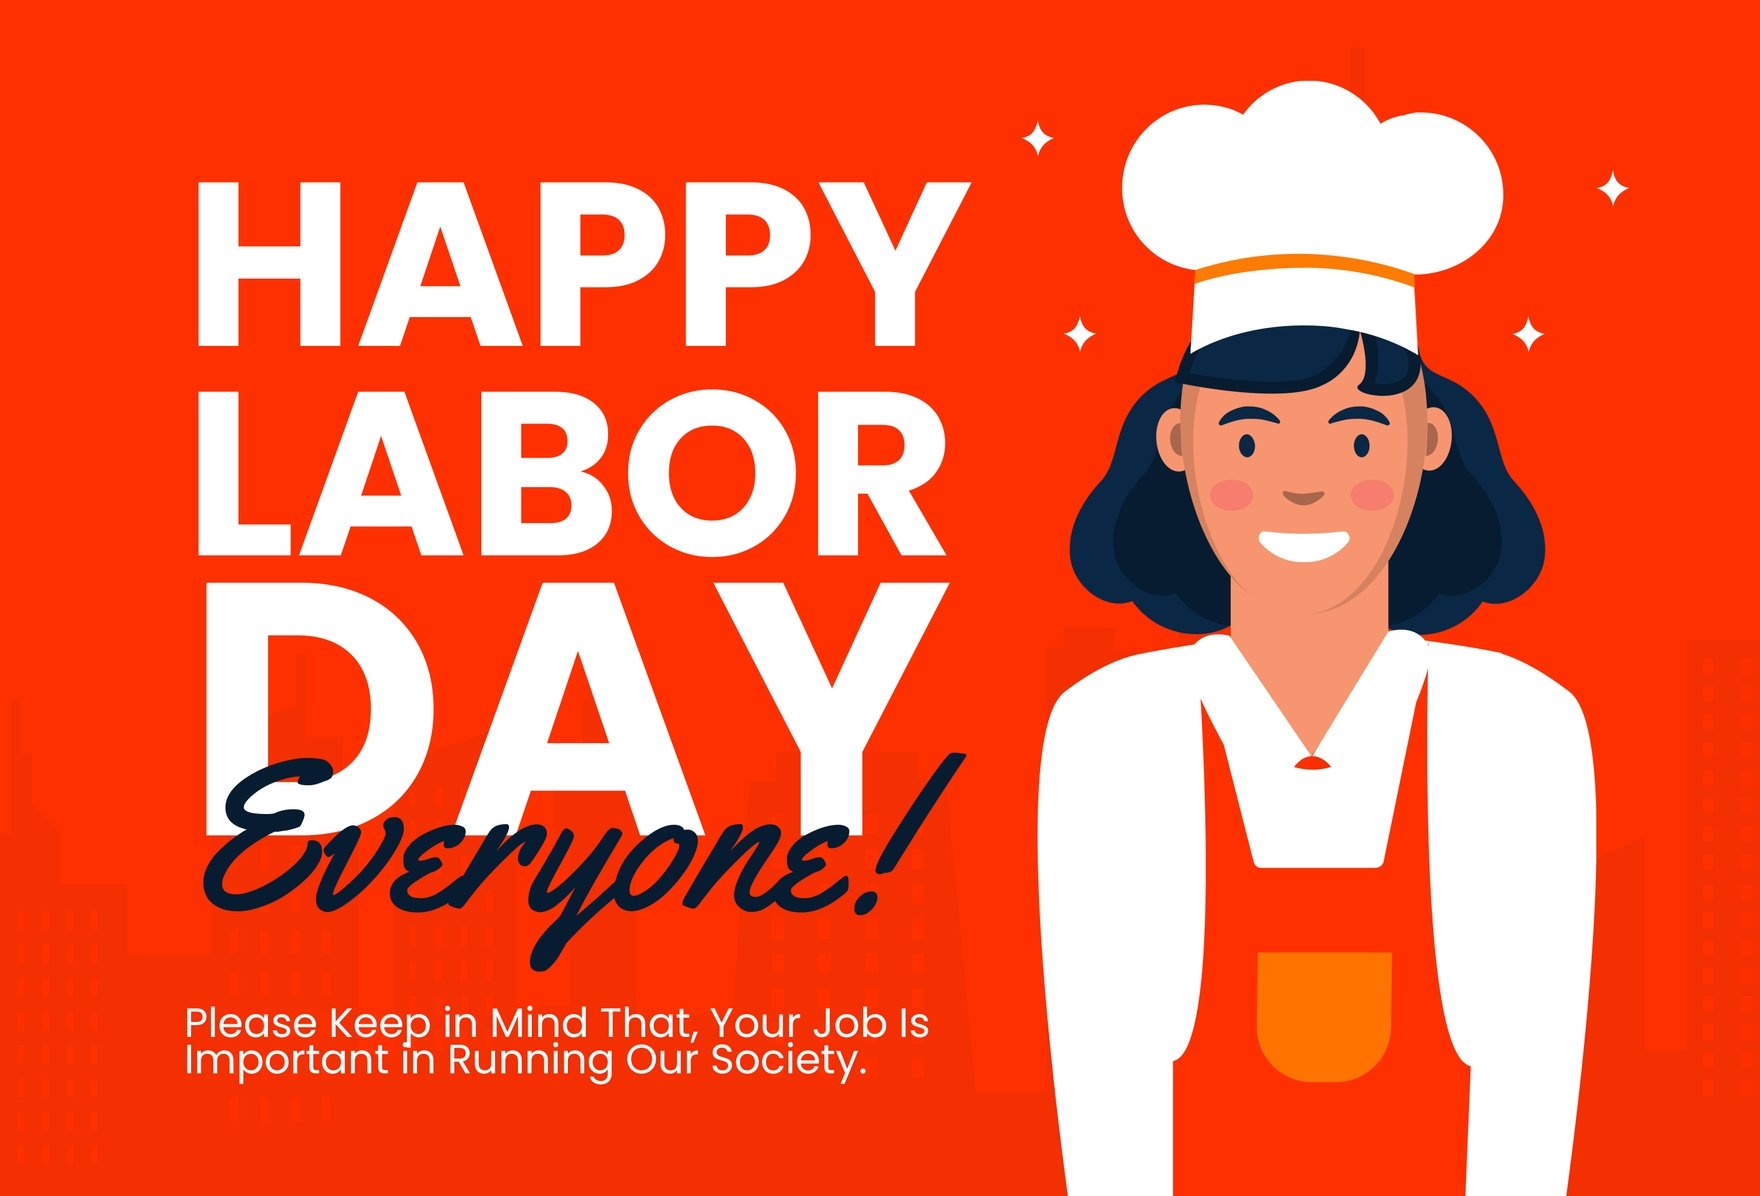 Free Modern Labor Day Greeting Card Template in Word, Illustrator, PSD